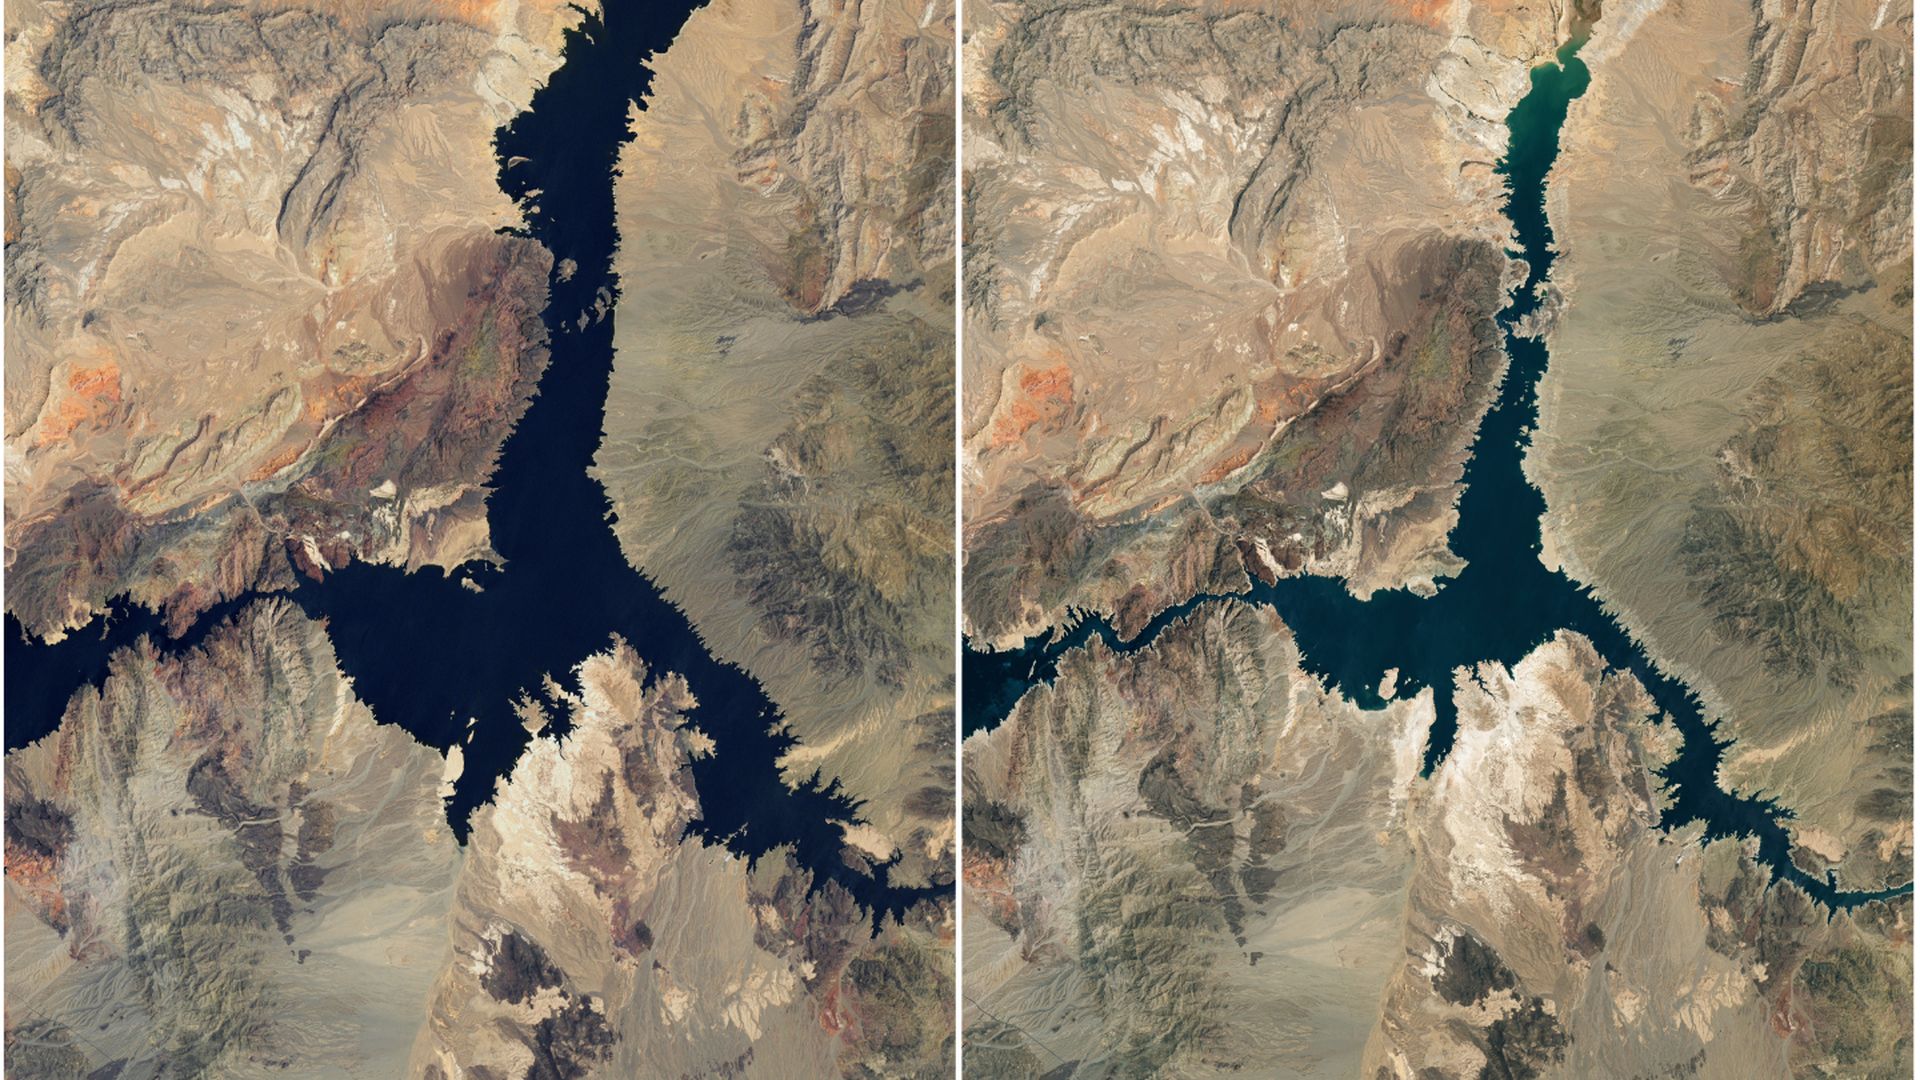 Satellite images showing Lake Mead with much more water in 2000 compared to Lake Mead in 2022 with less water